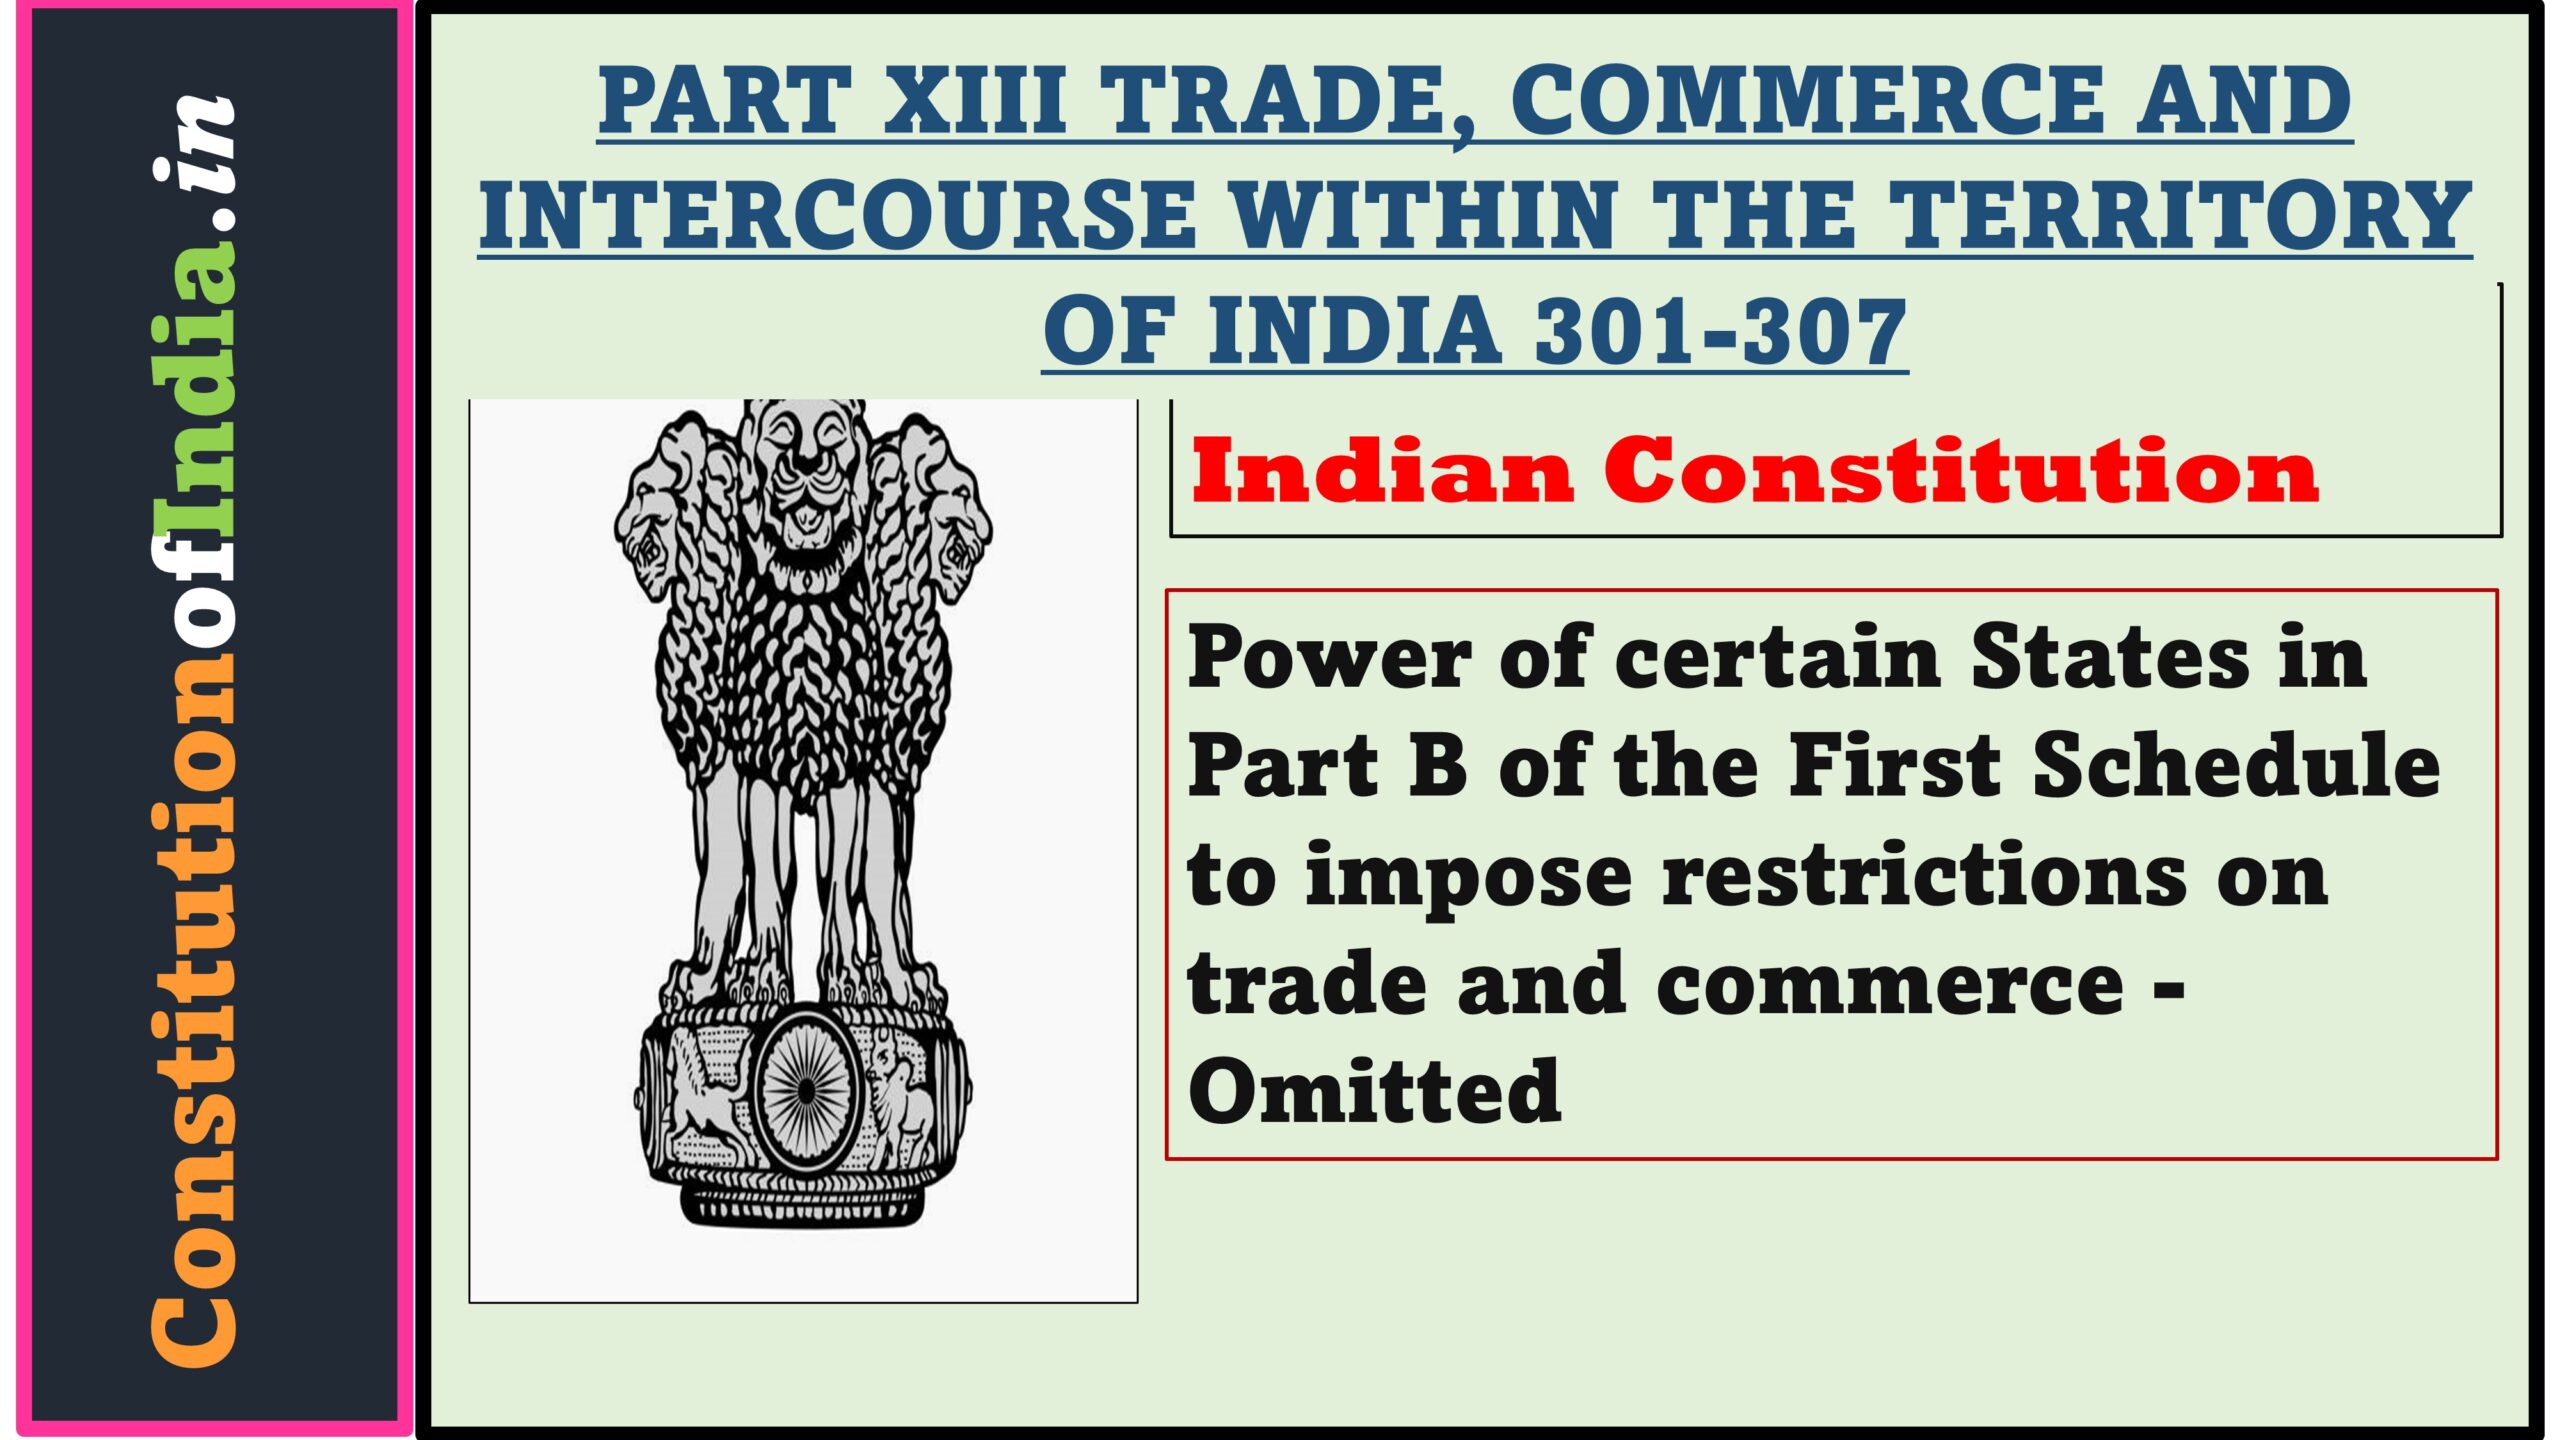 Article 306 of The Indian Constitution